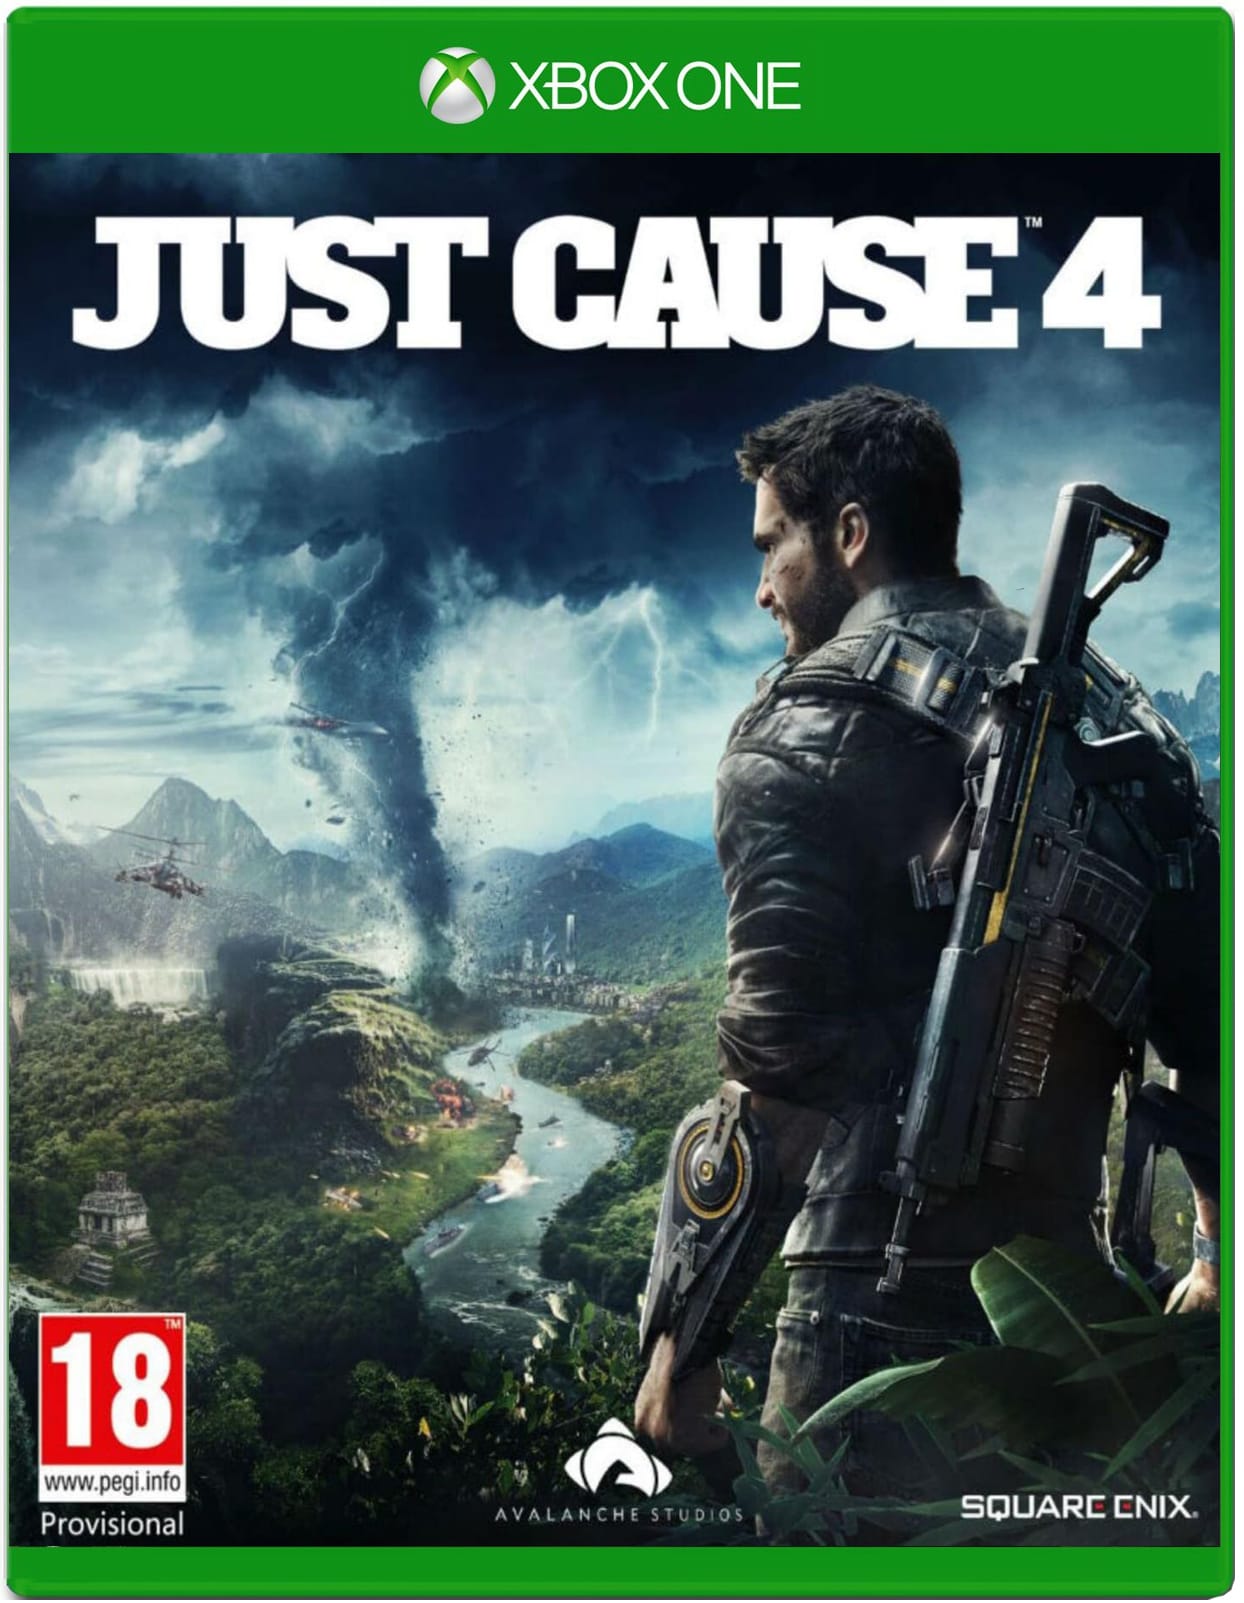 Ps4 игры 7. Игра just cause 4. Just cause 4 ps4 диск. Just cause ps4. Just cause игра Xbox.